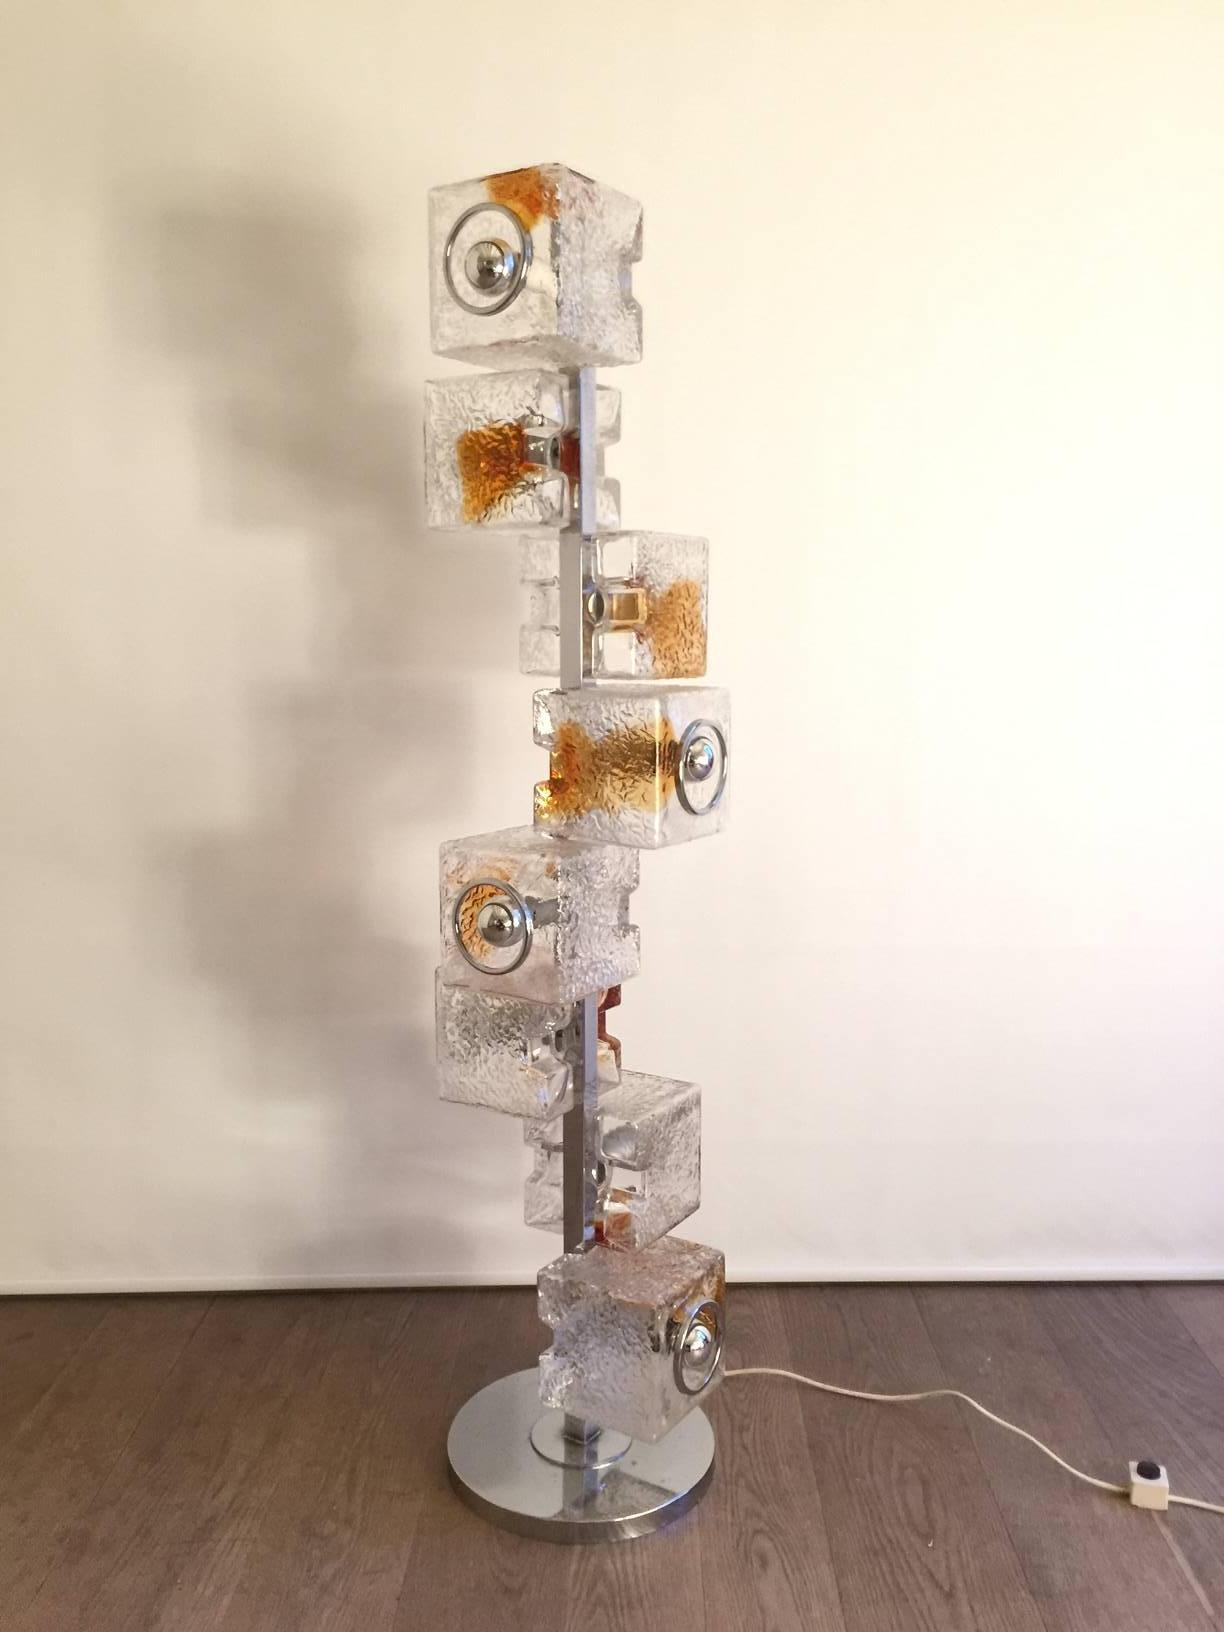  Toni Zuccheri Cubes Floor Lamp, VeArt, Murano Italy, 1970 In Excellent Condition For Sale In Padova, IT